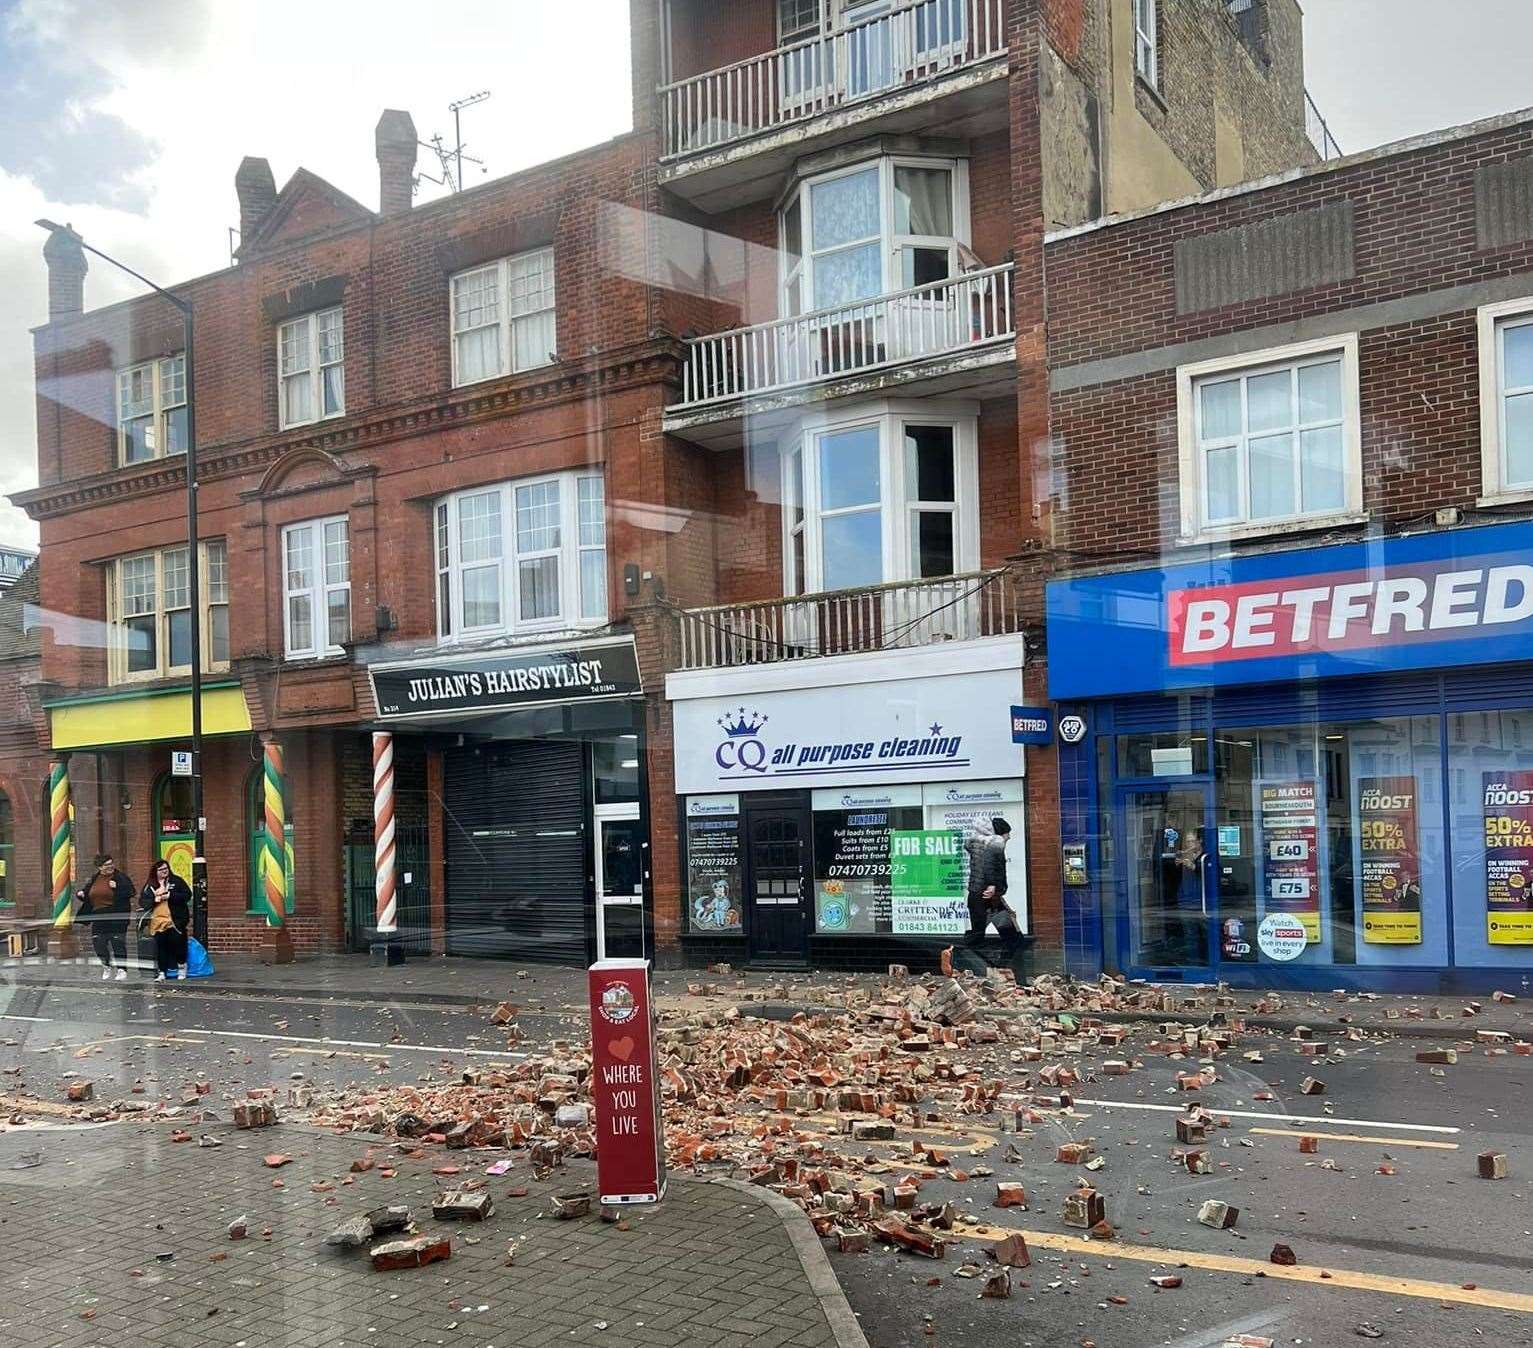 Debris spread across the street as a result of a building collapse in Northdown Road, Margate Picture: Nard Miller